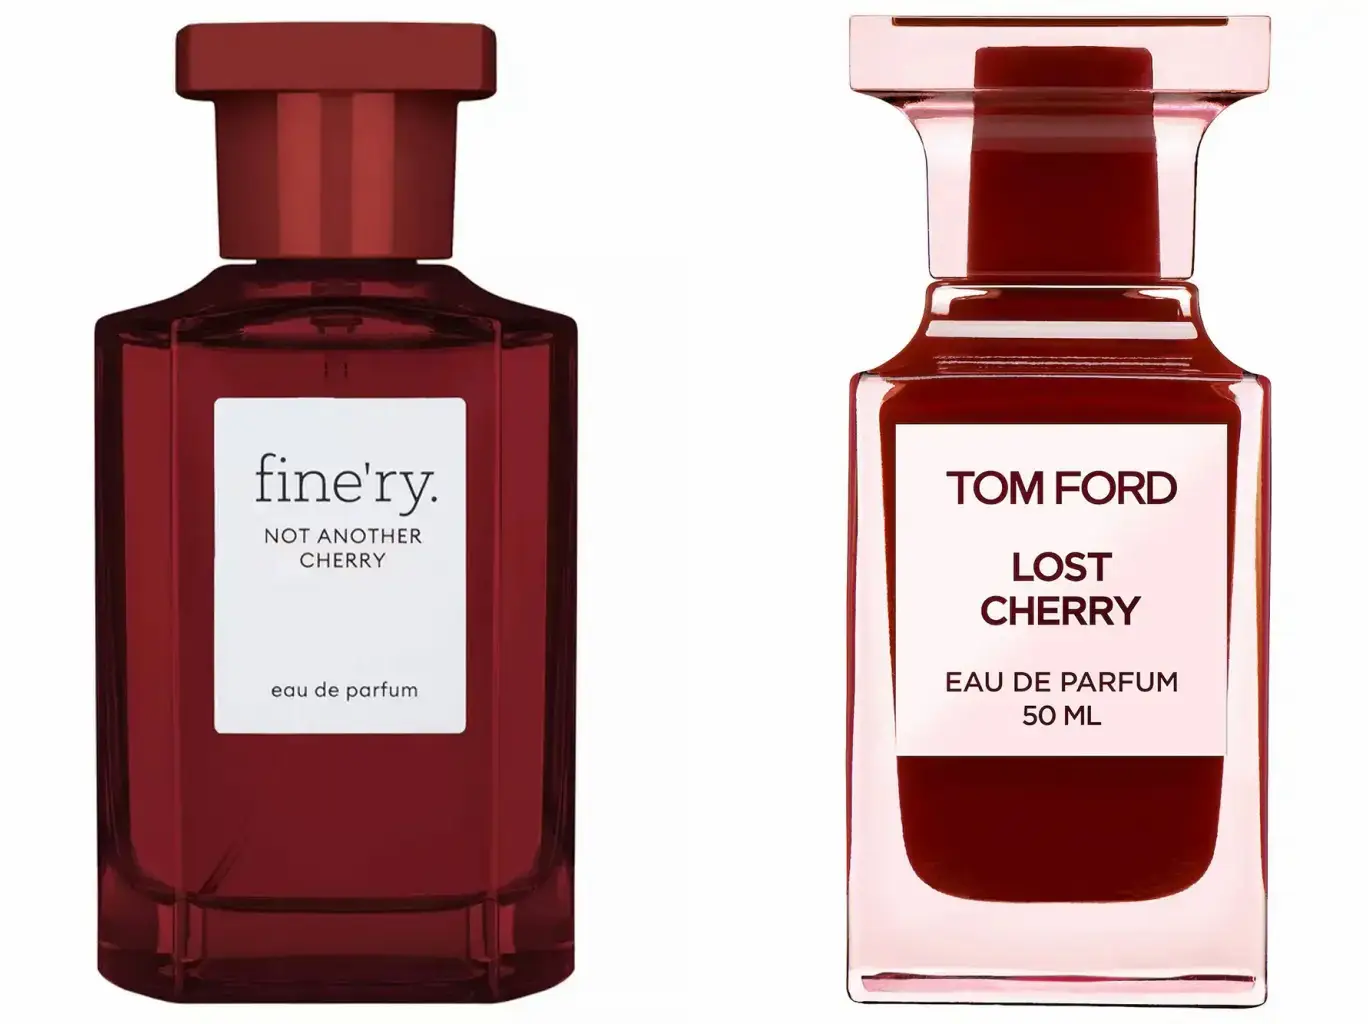 Ombre Nomade by Louis Vuitton and Lost Cherry by Tom Ford! What a laye